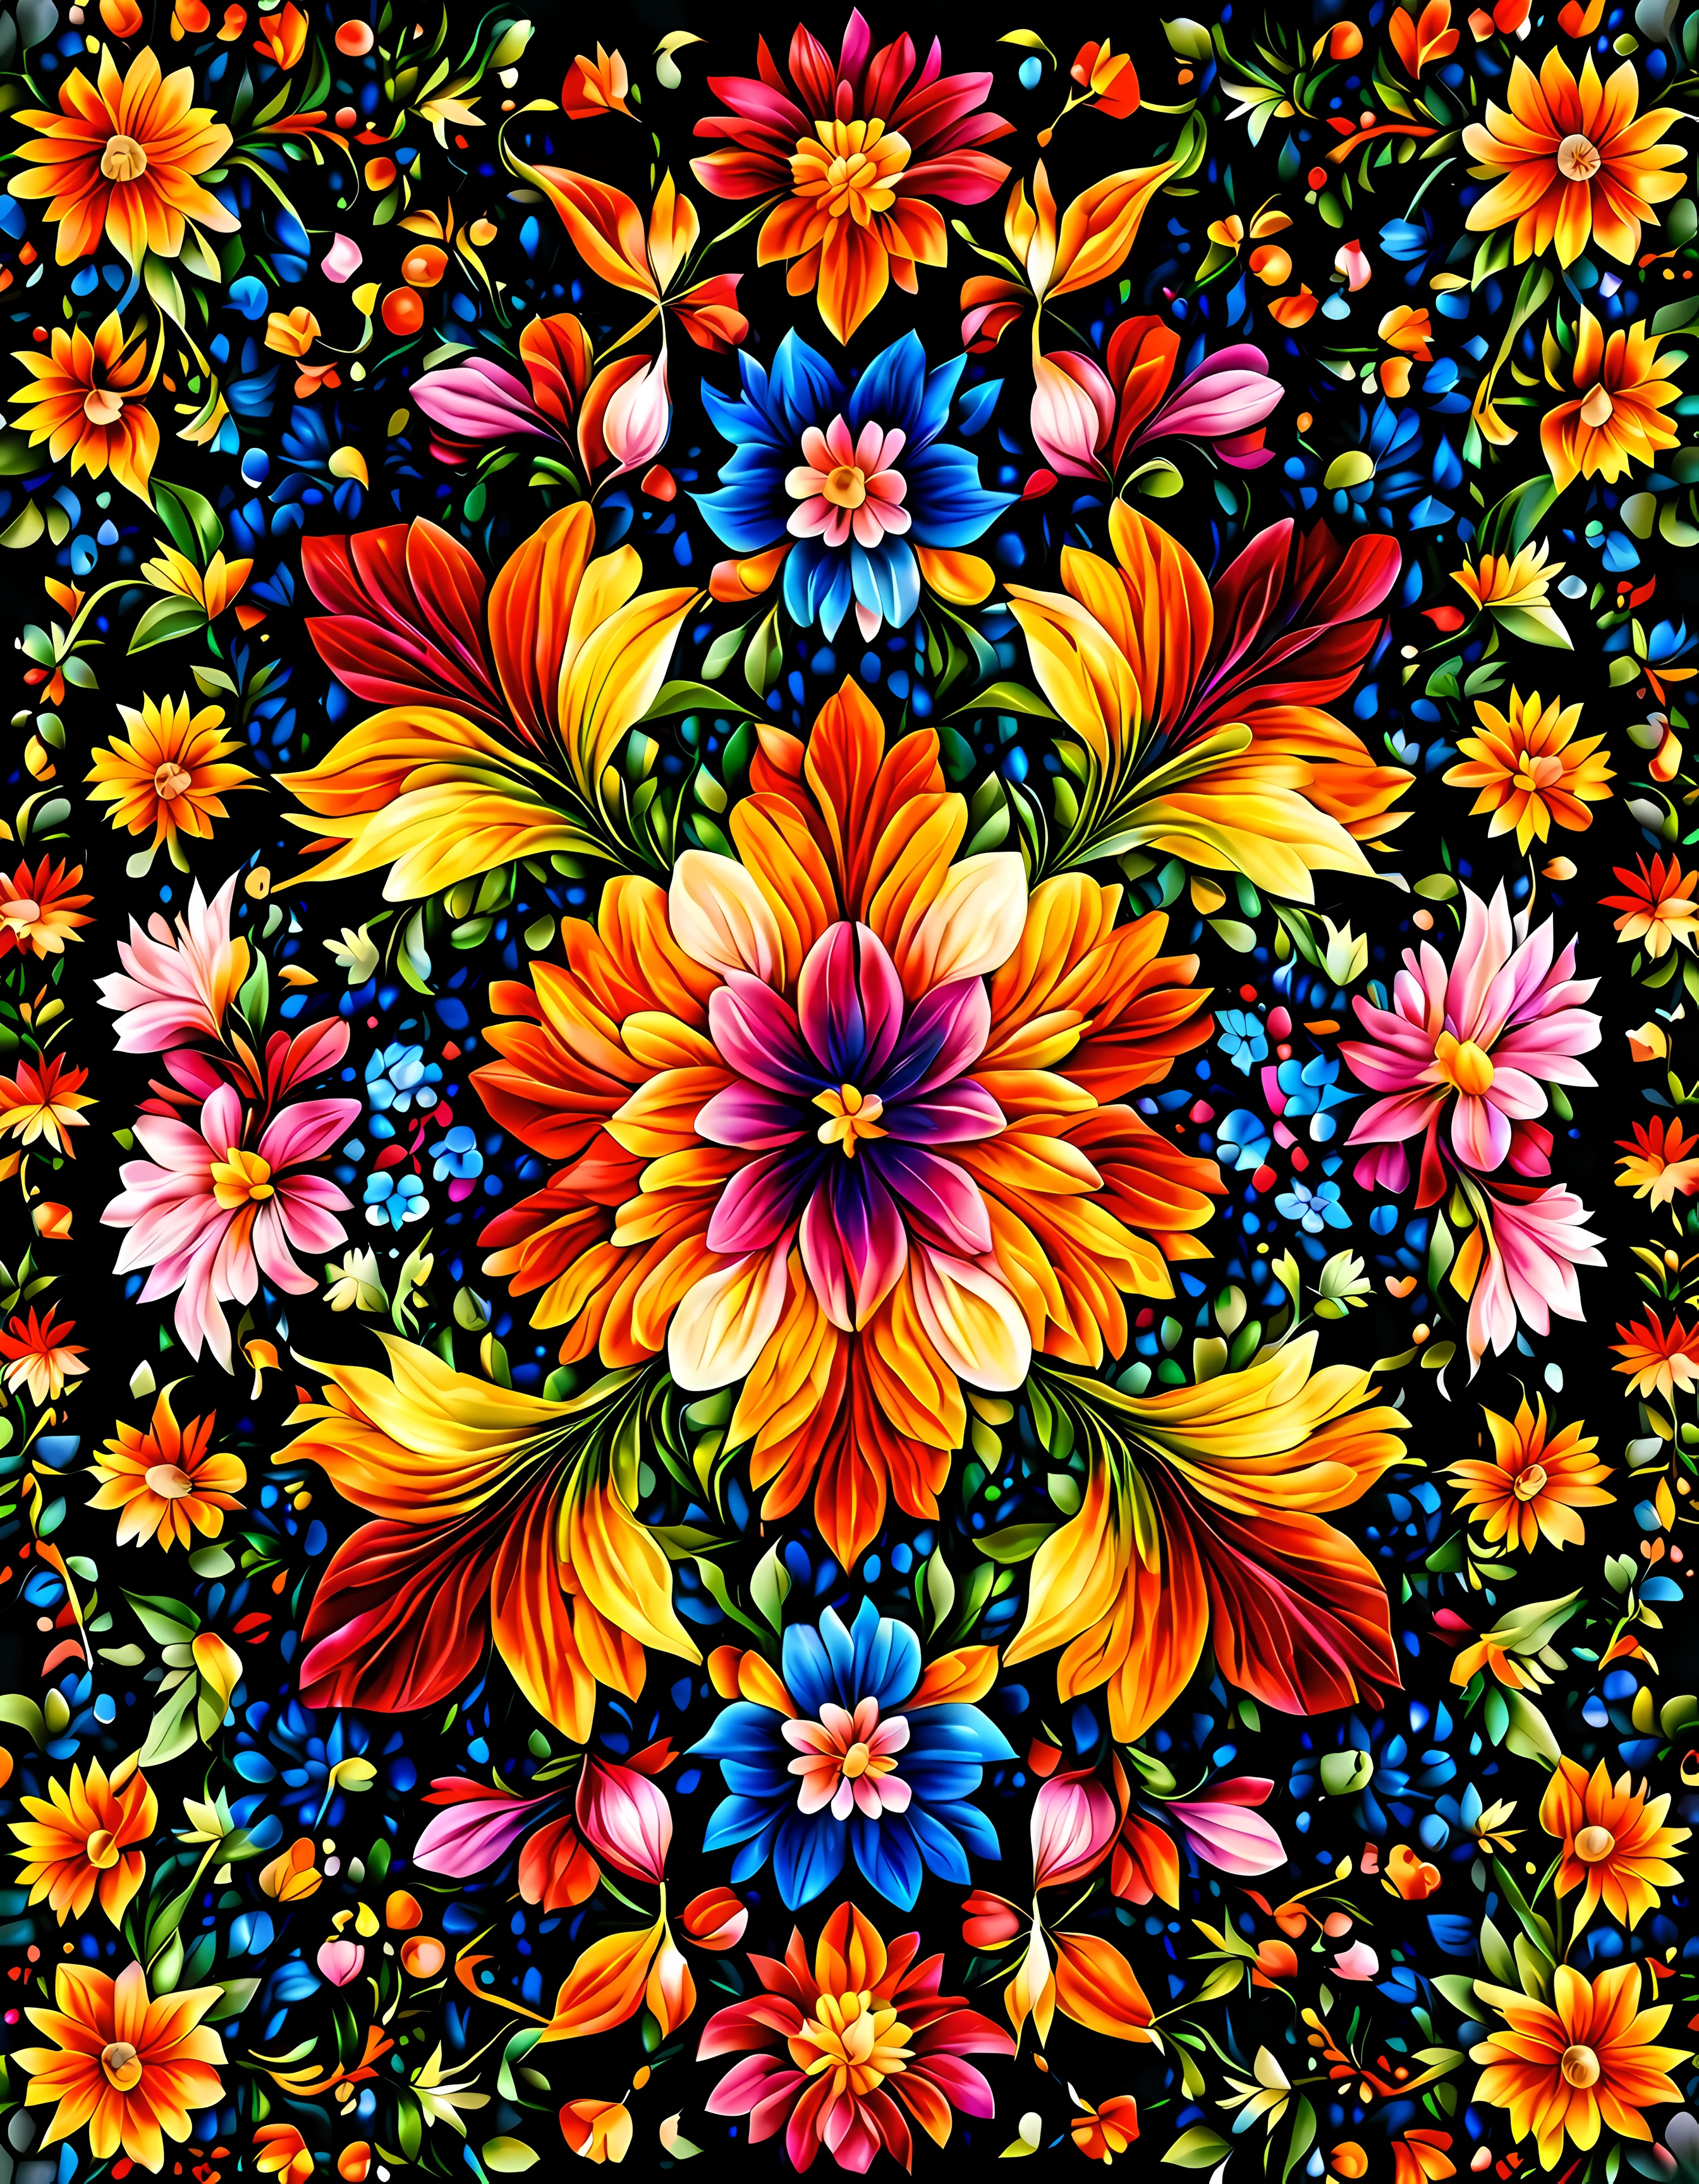 Design a visually captivating and harmoniouosaic))) artwork where ((flowers)) unfold in a mesmerizing display of colors and shapes, a tapestry of intricate patterns and textures, vibrant hues swirling and intermingling, a sense of wonder and enchantment, masterpiece in maximum 16K resolution, superb quality. | ((More_Detail))